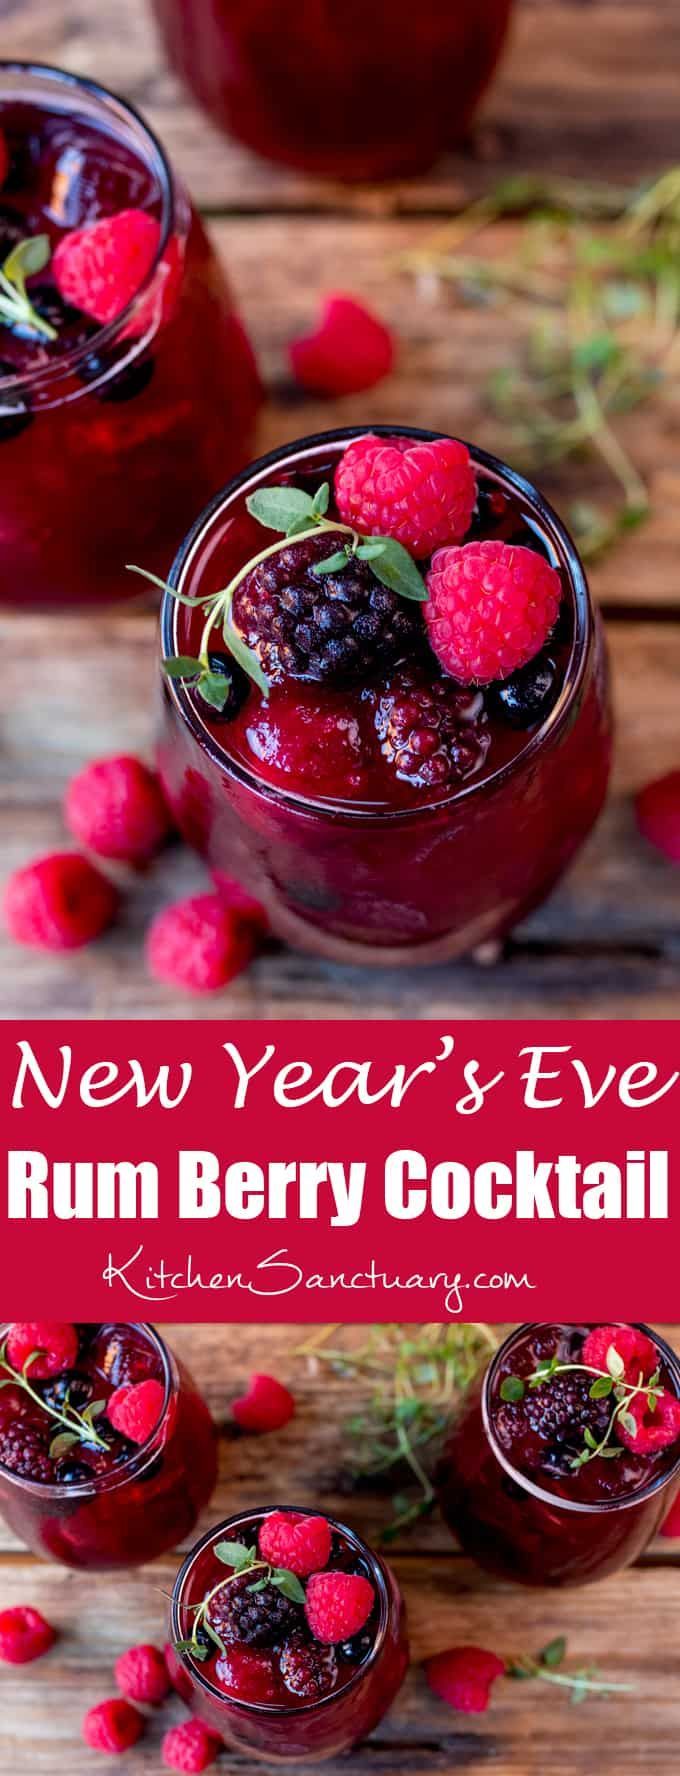 New Year's Eve Rum Berry Cocktail -   18 holiday Drinks with rum ideas